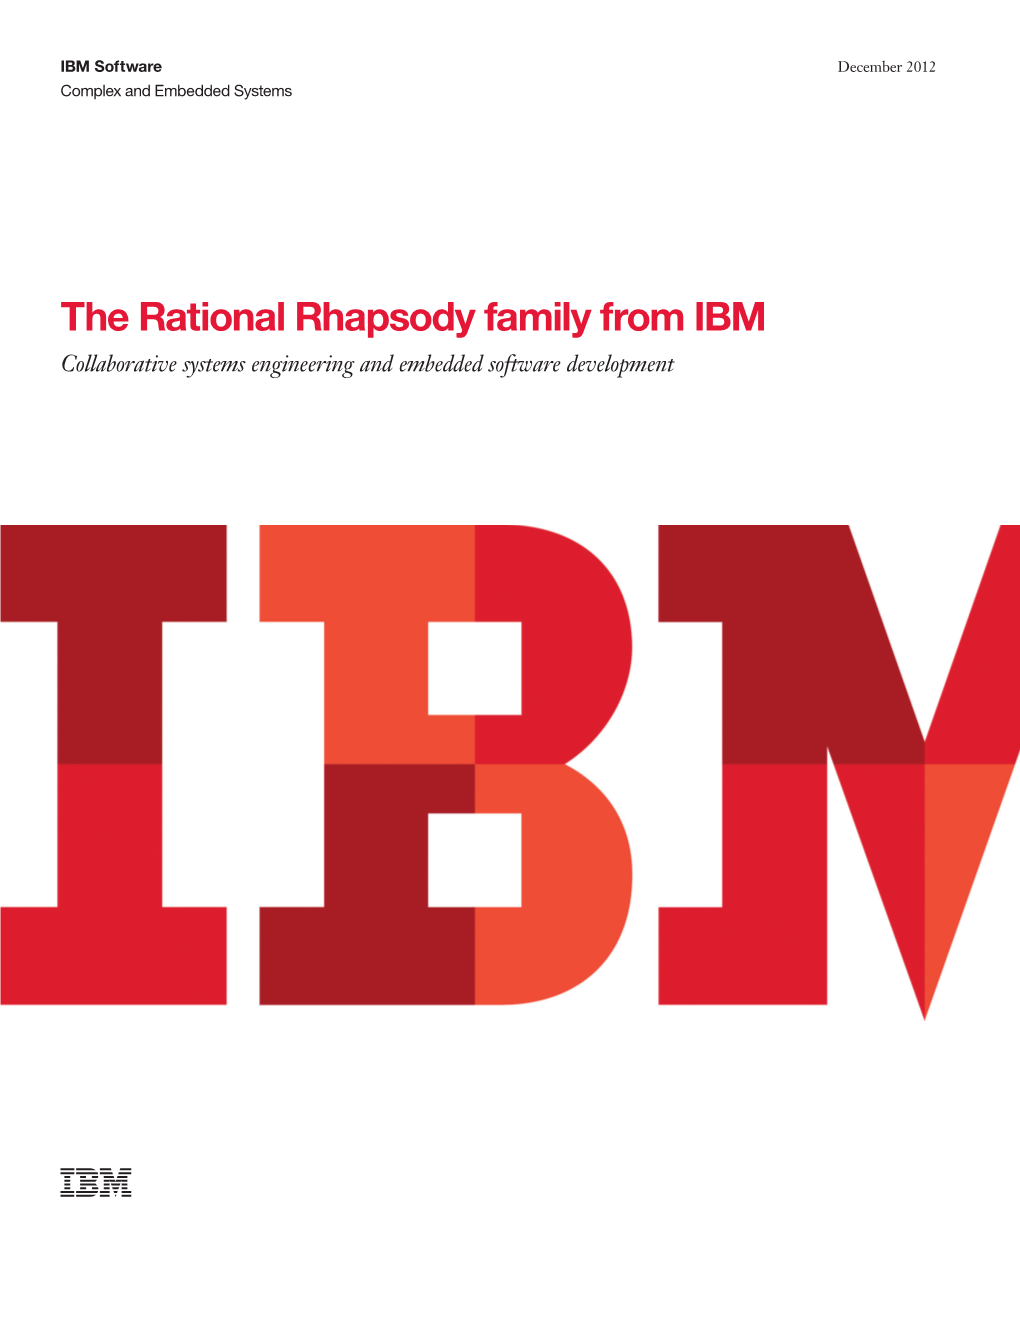 The Rational Rhapsody Family from IBM Collaborative Systems Engineering and Embedded Software Development 2 the Rational Rhapsody Family from IBM